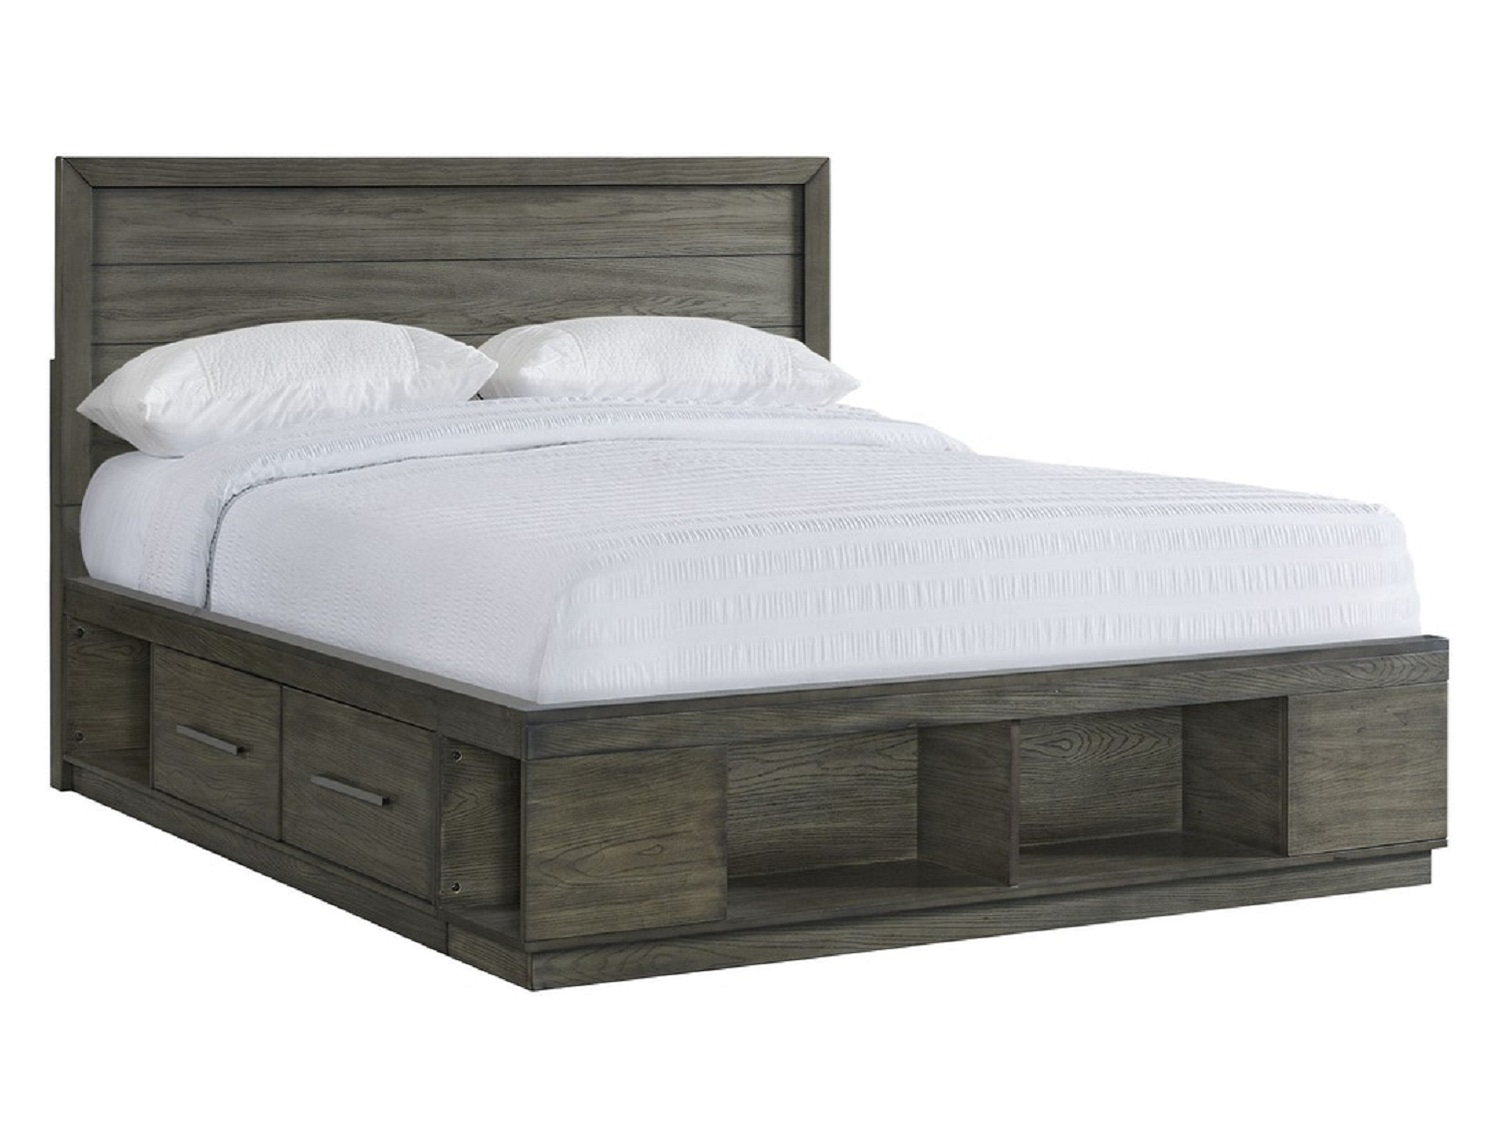 GENITO King Bed - Left Storage